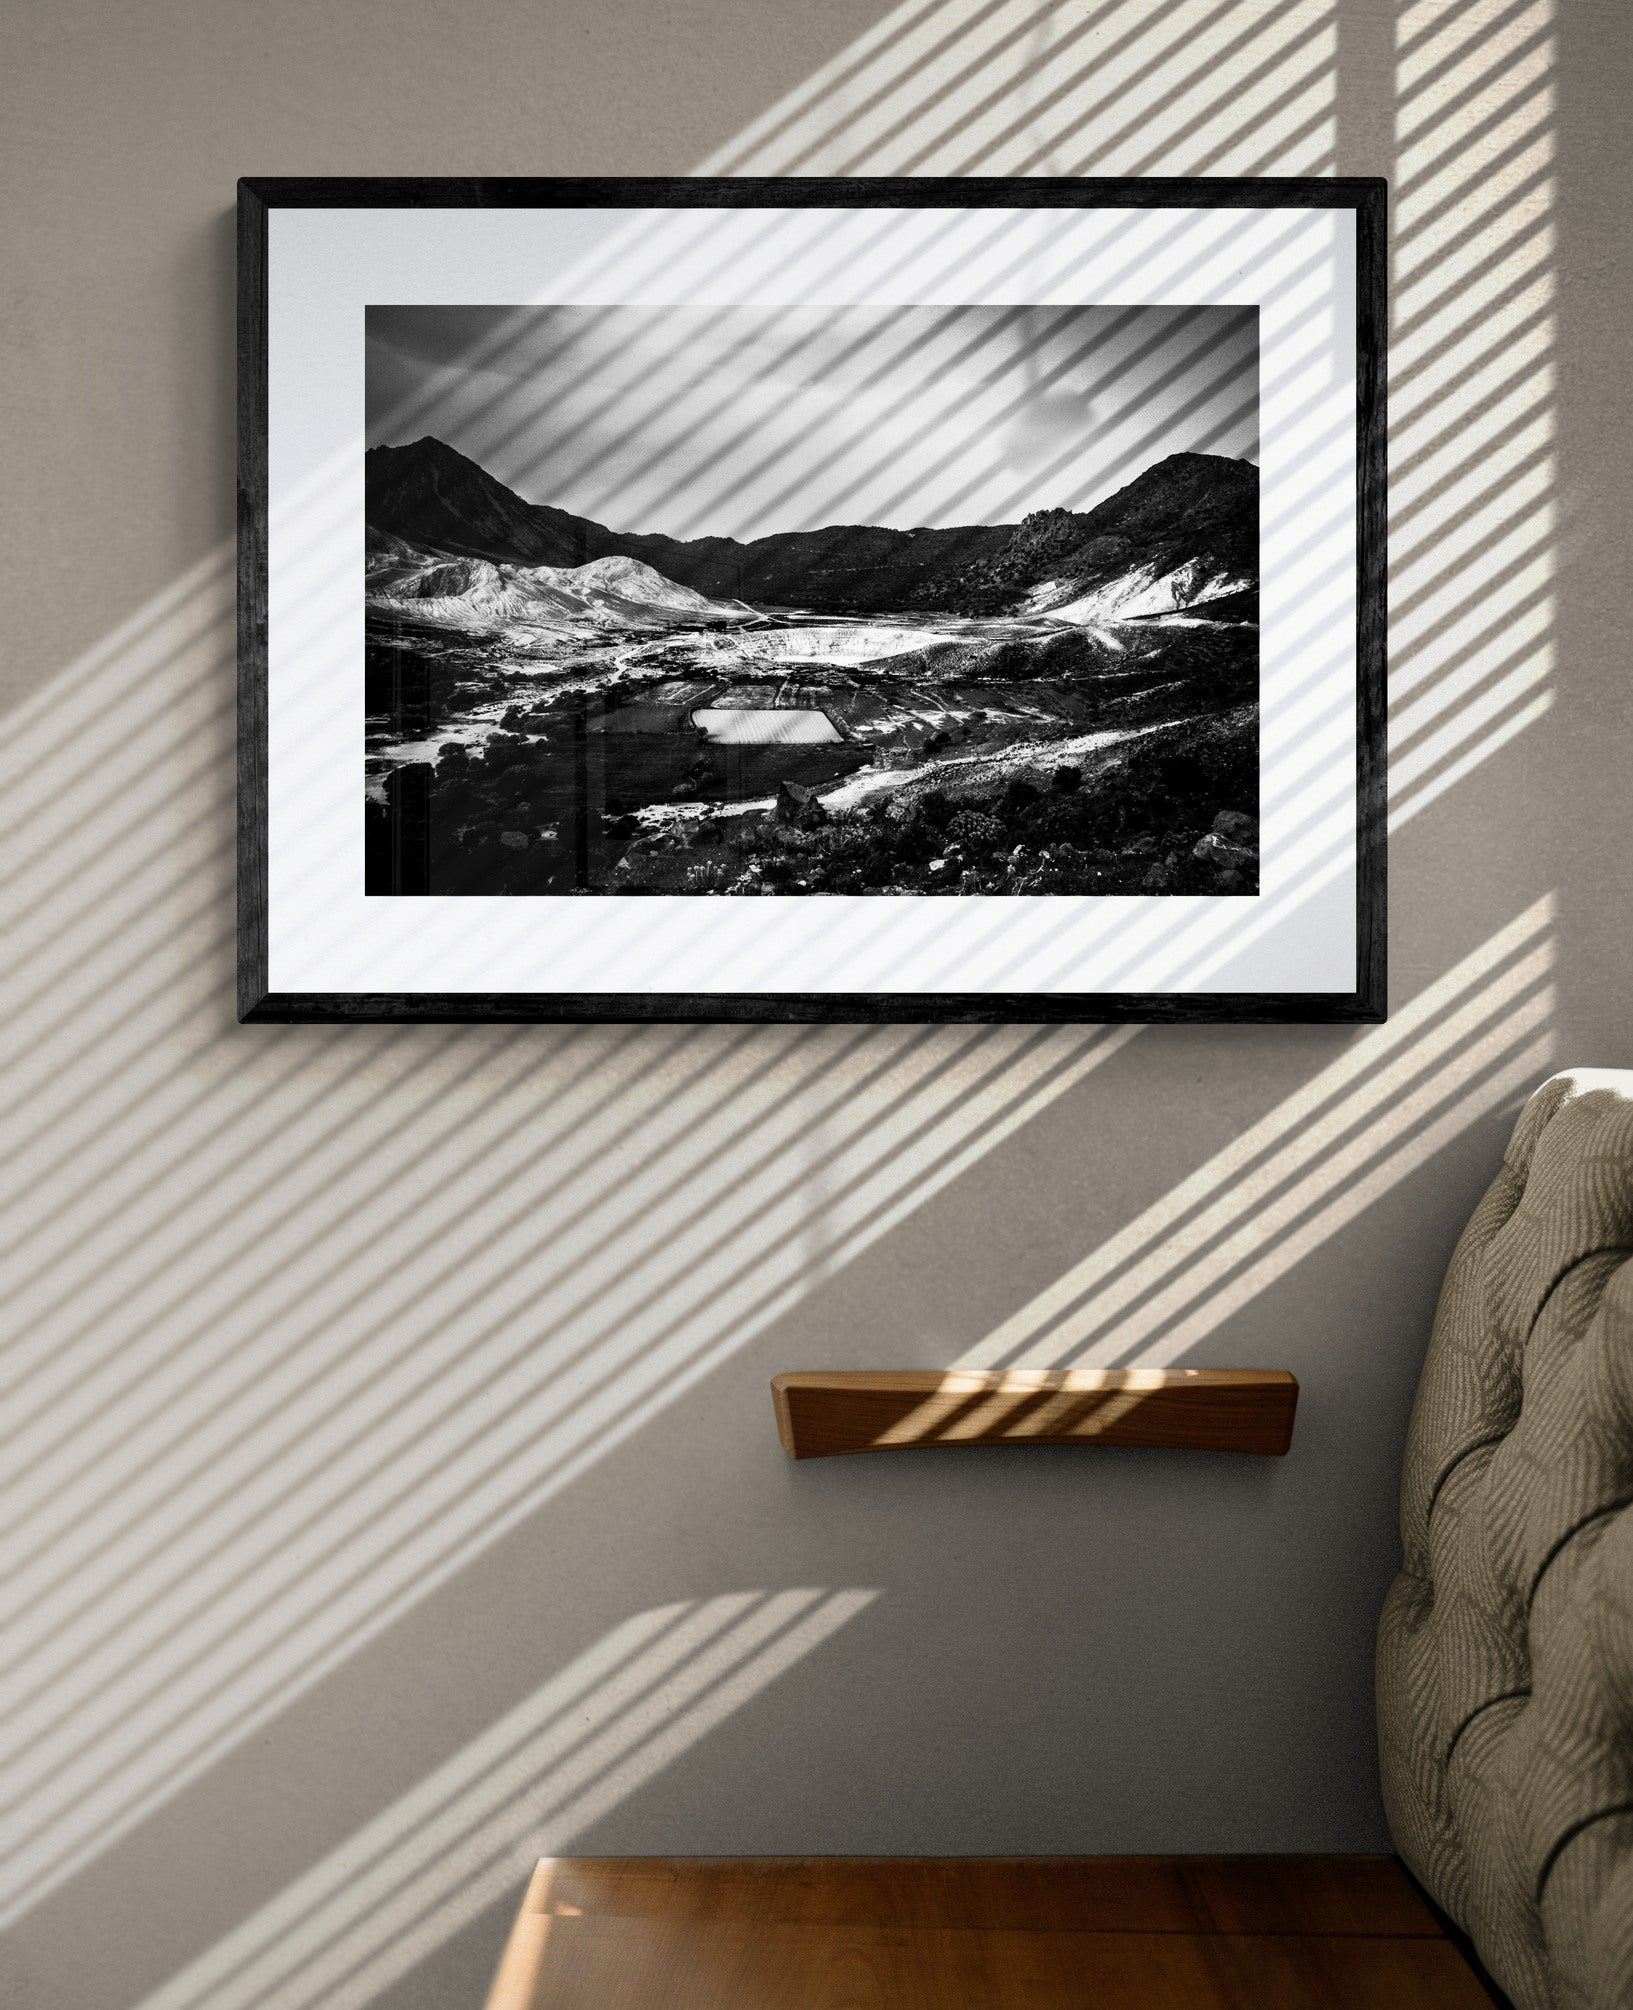 Black and White Photography Wall Art Greece | Volcano of Nisyros Dodecanese Greece by George Tatakis - single framed photo